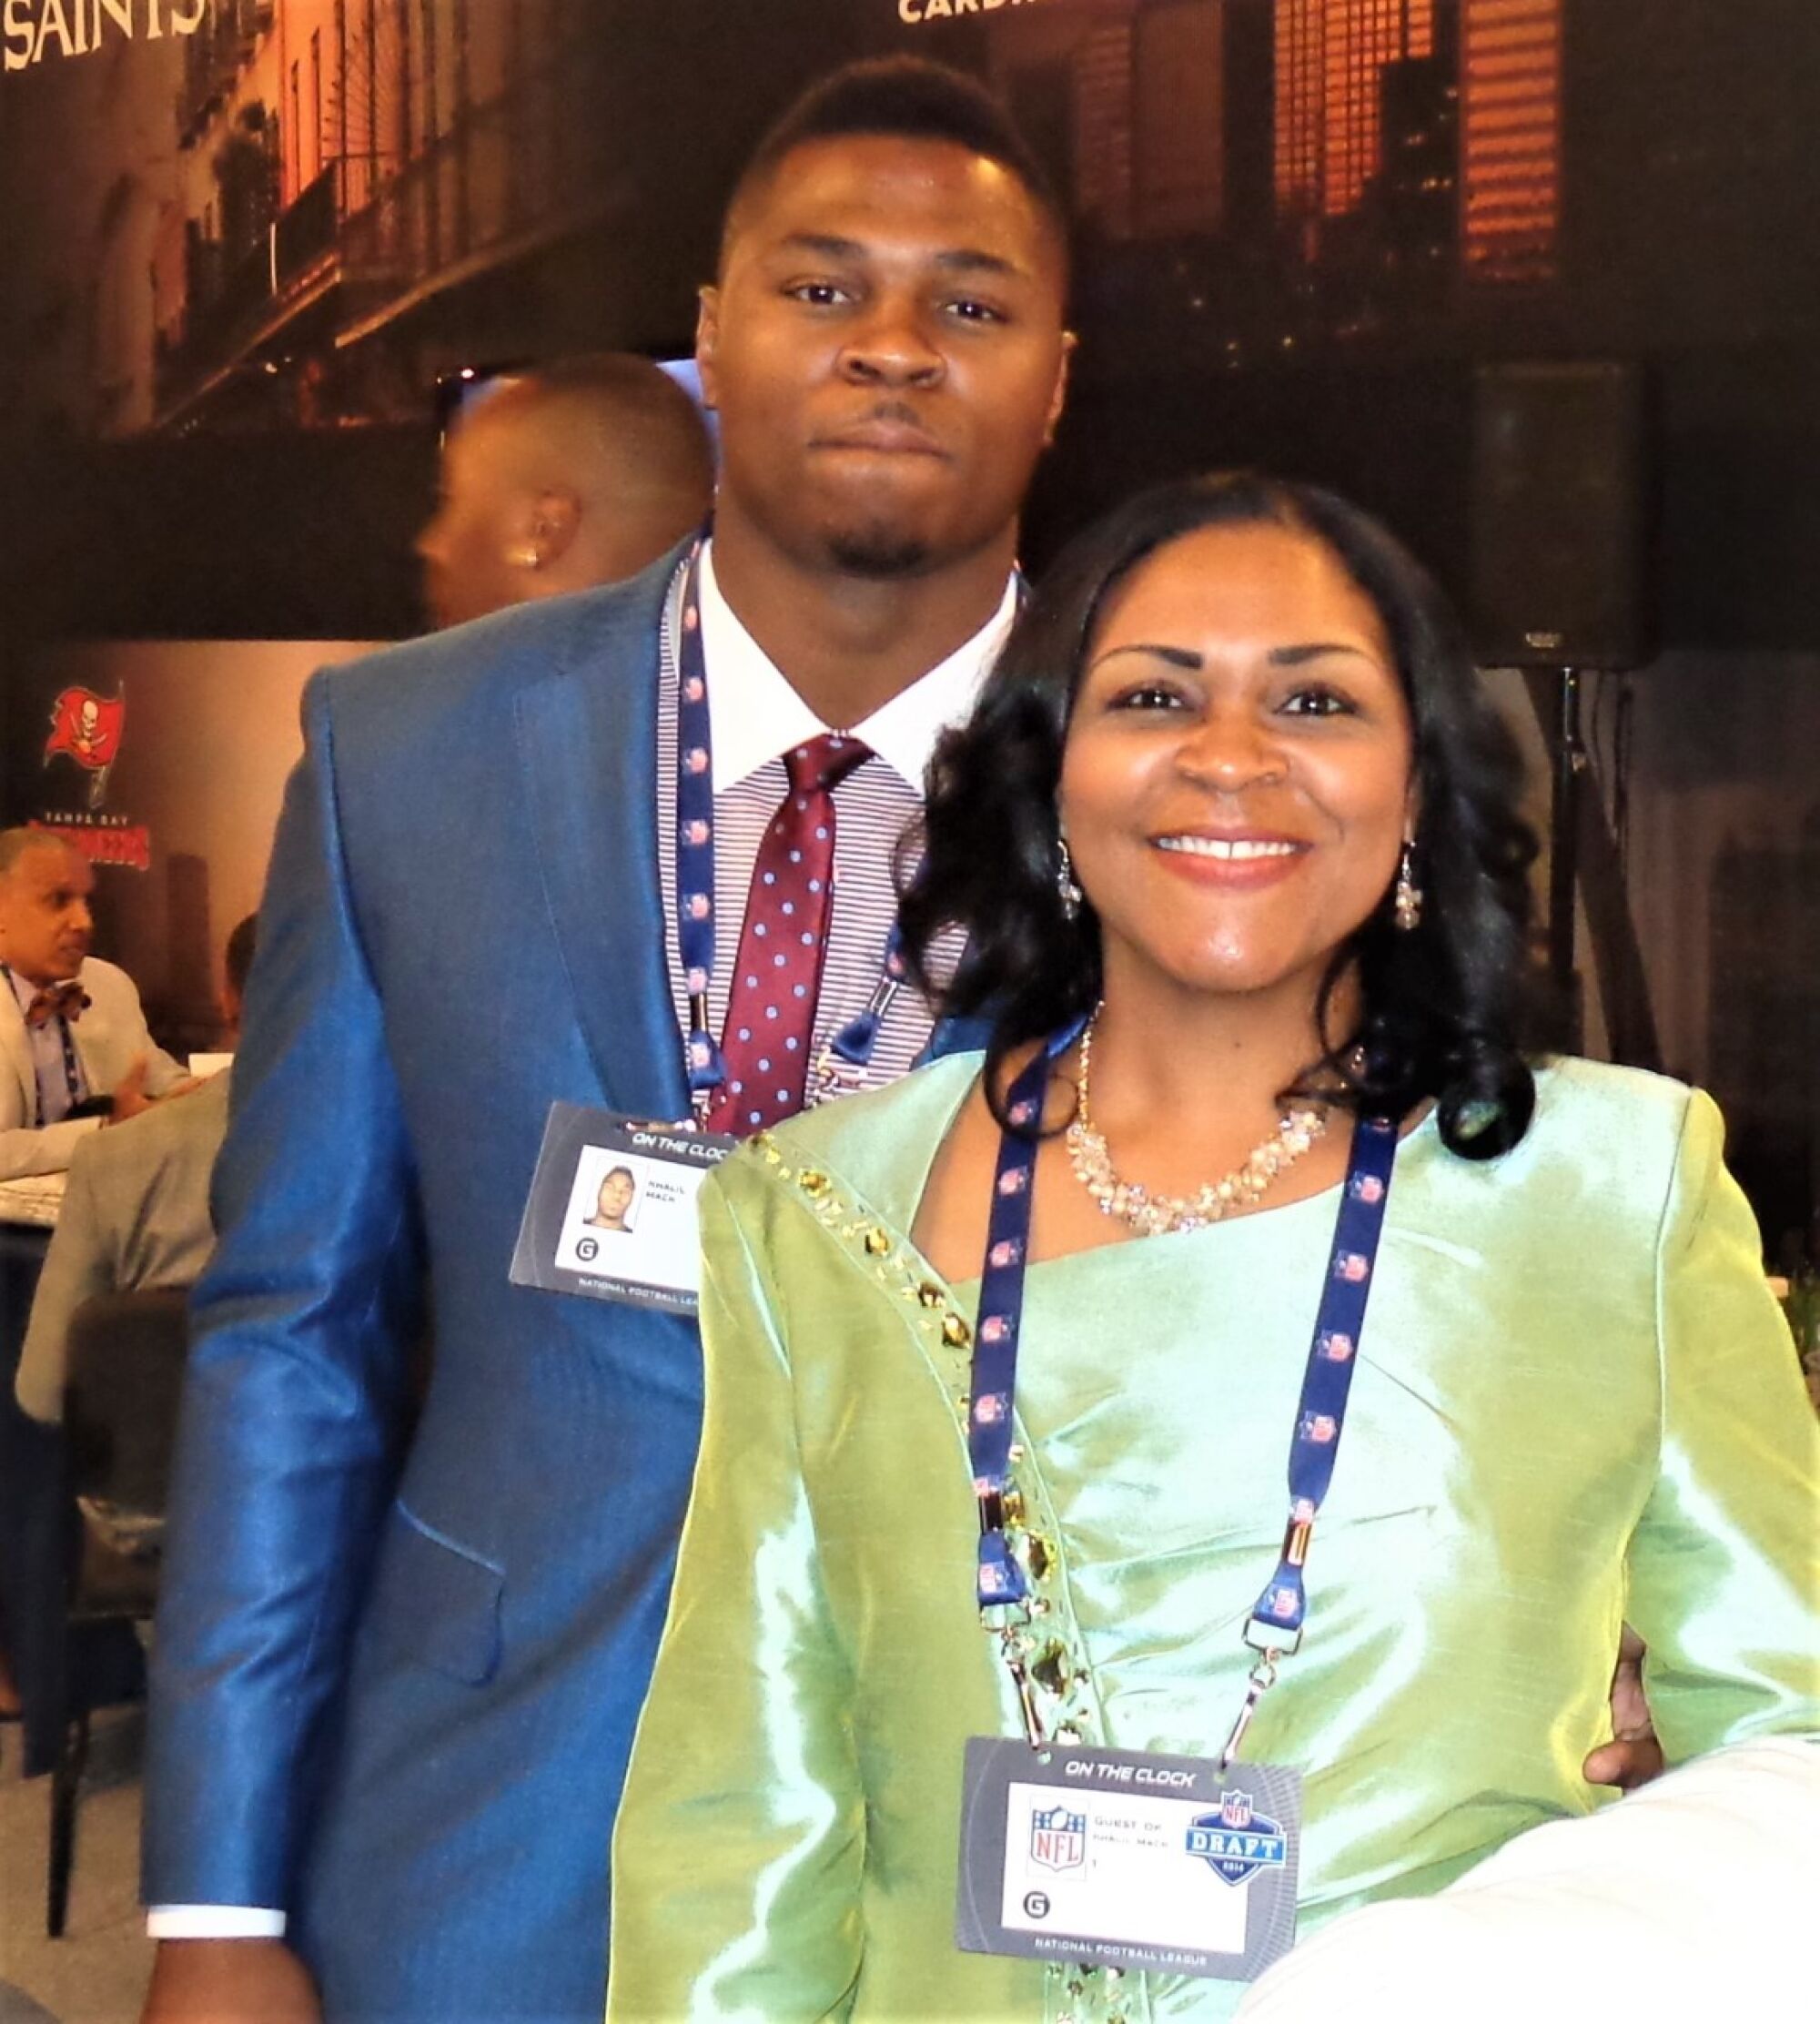 Khalil Mack attends the 2014 NFL draft in New York with his mother, Yolanda.